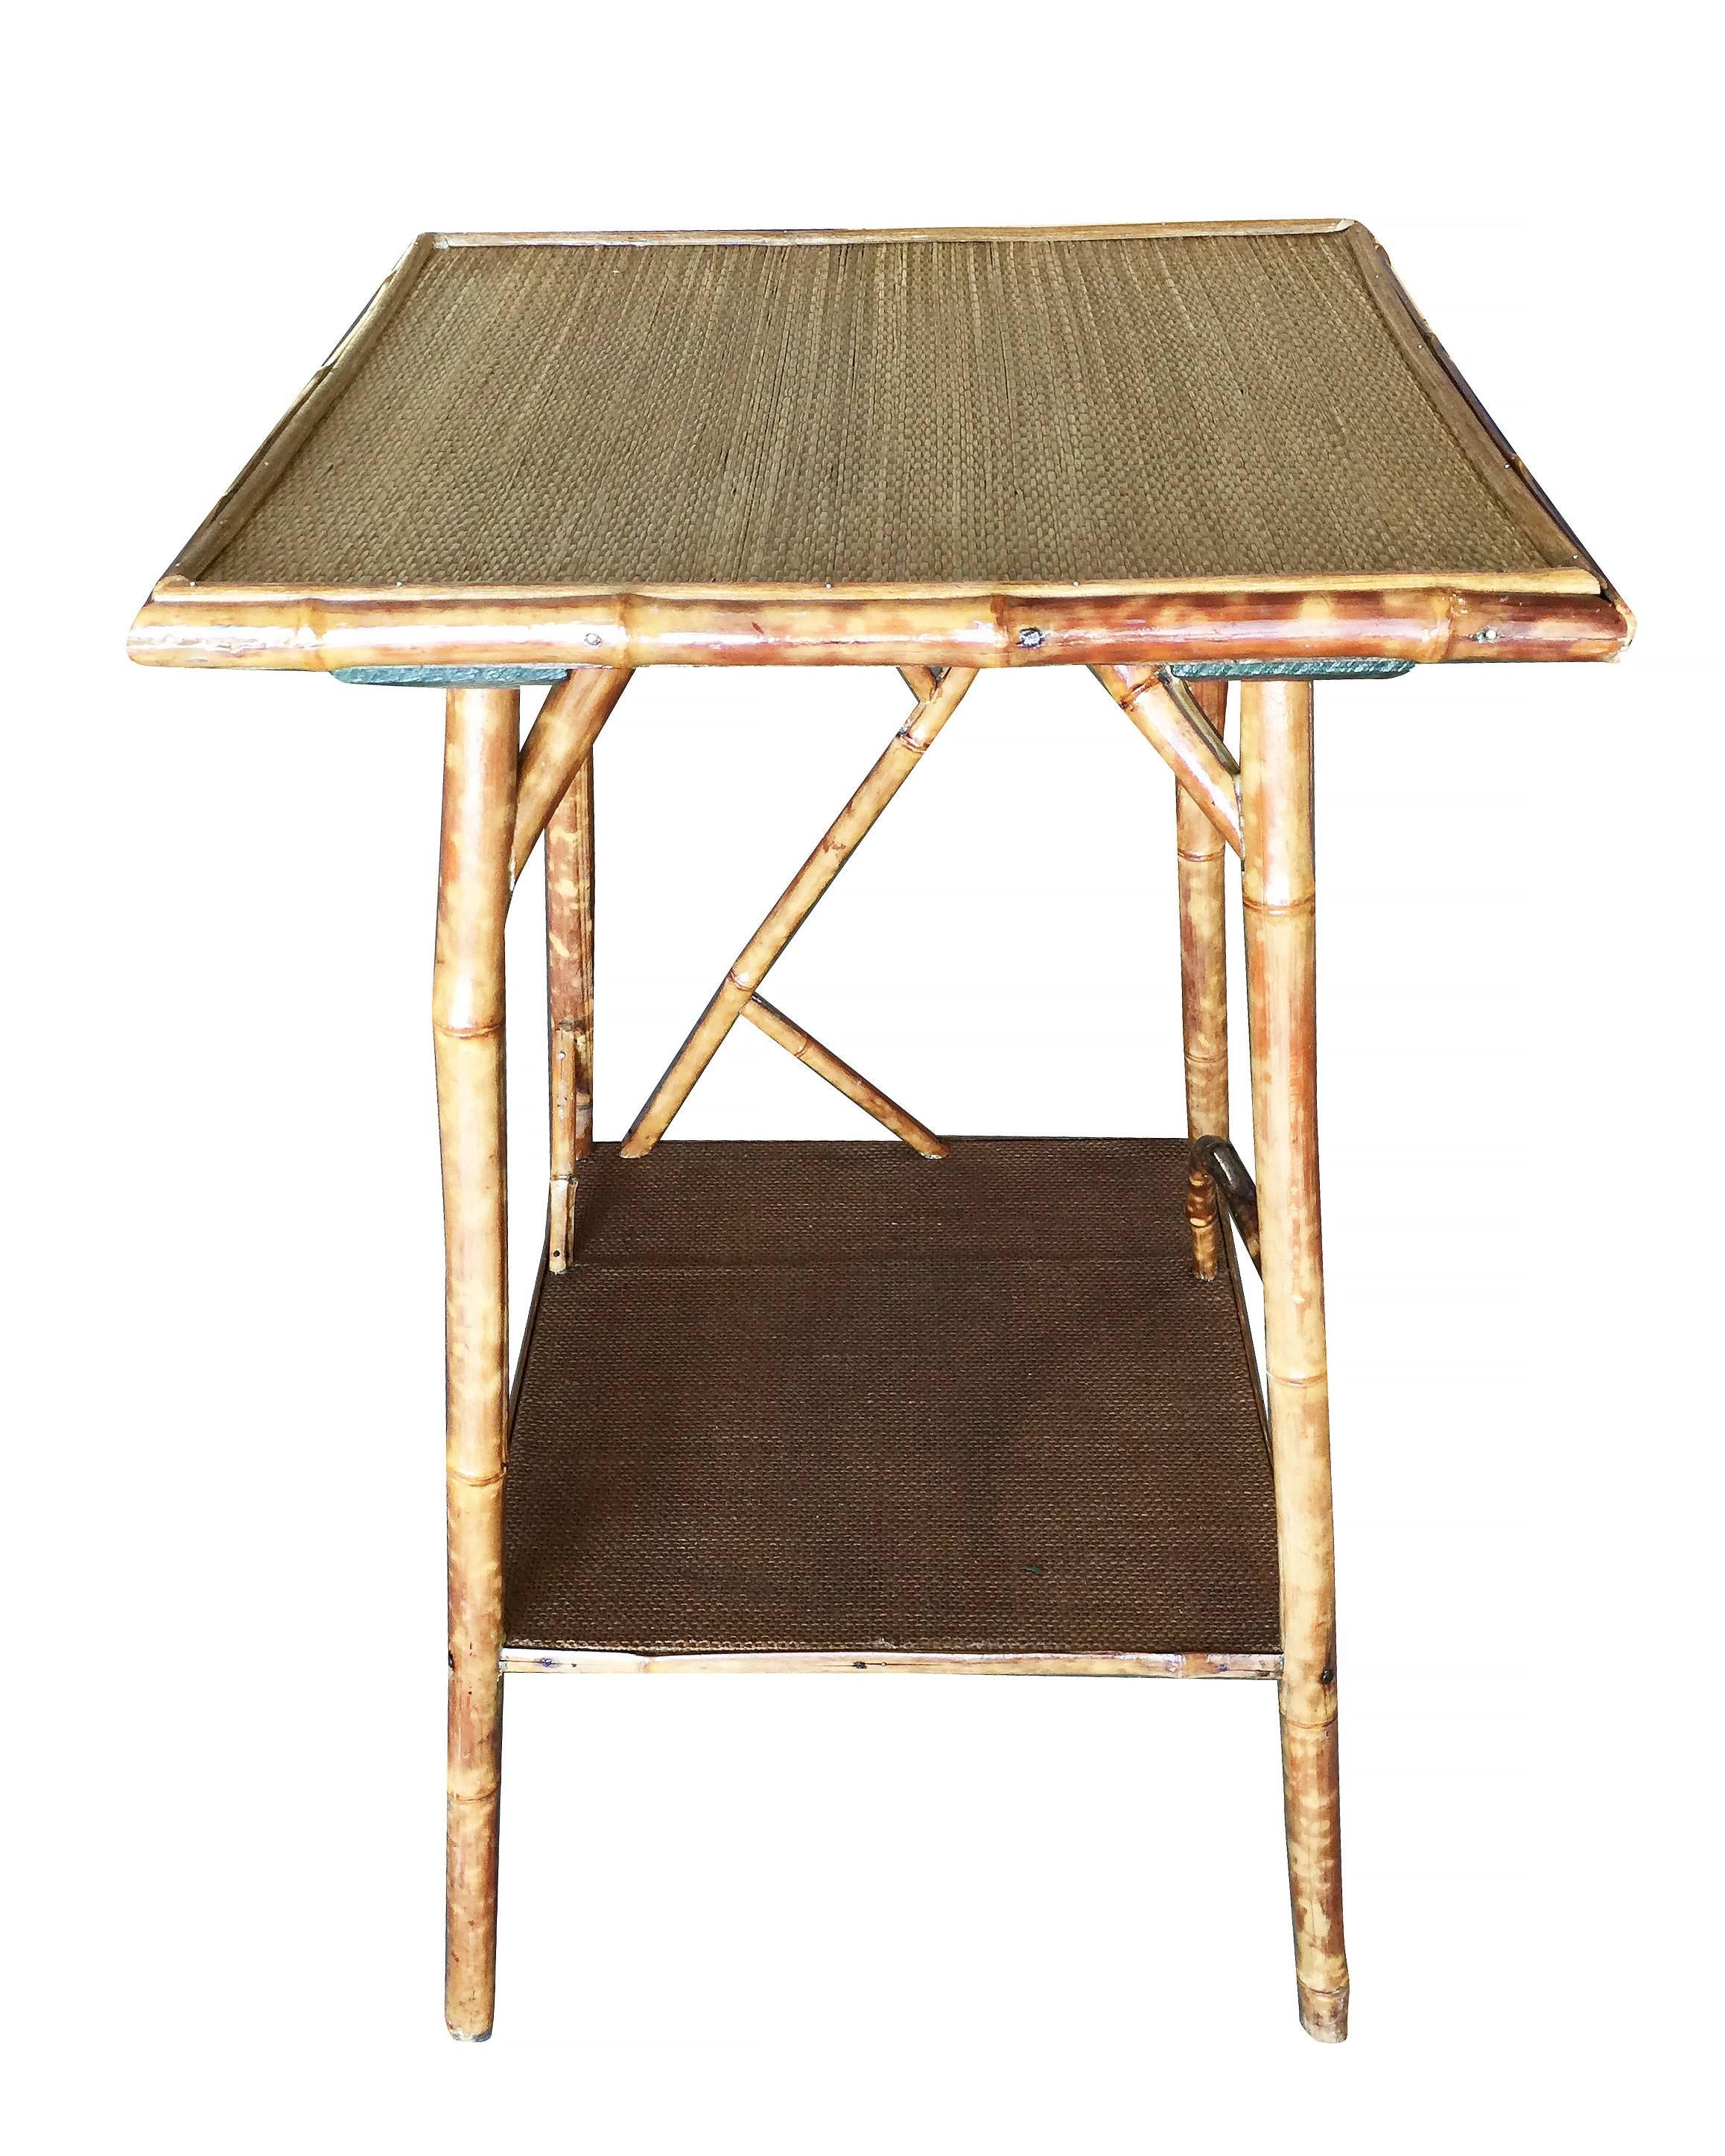 American Restored Tiger Bamboo Pedestal Side Table with Organic Formed Accents